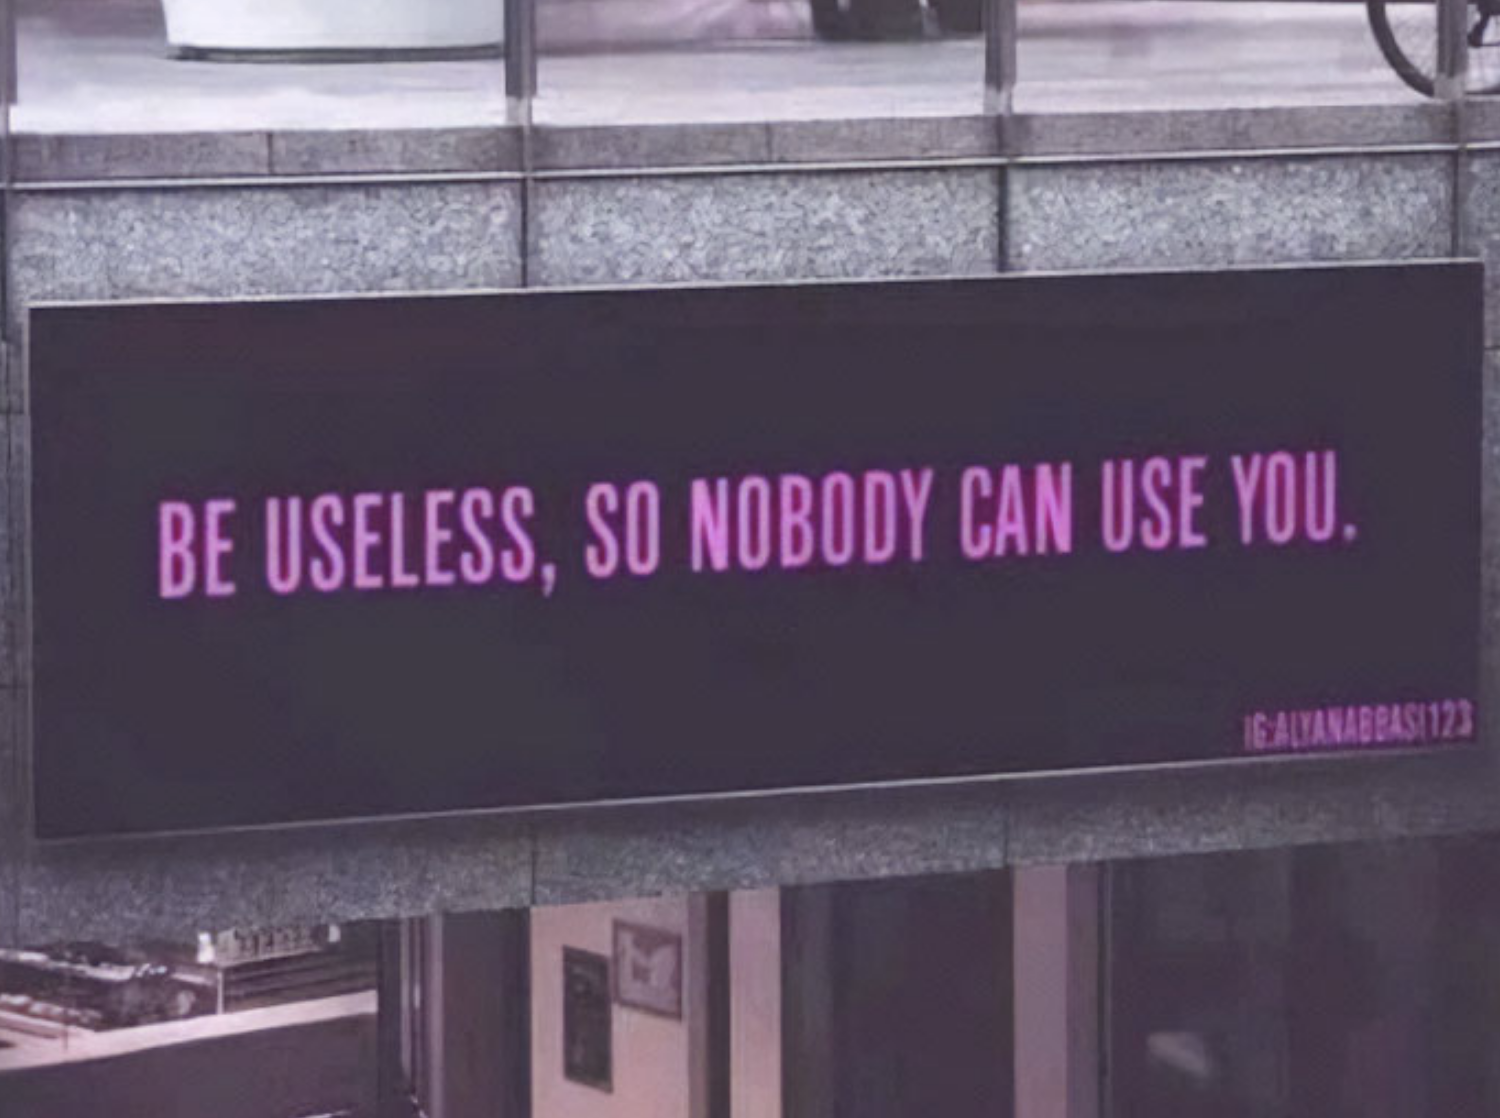 &quot;Be useless, so nobody can use you.&quot;